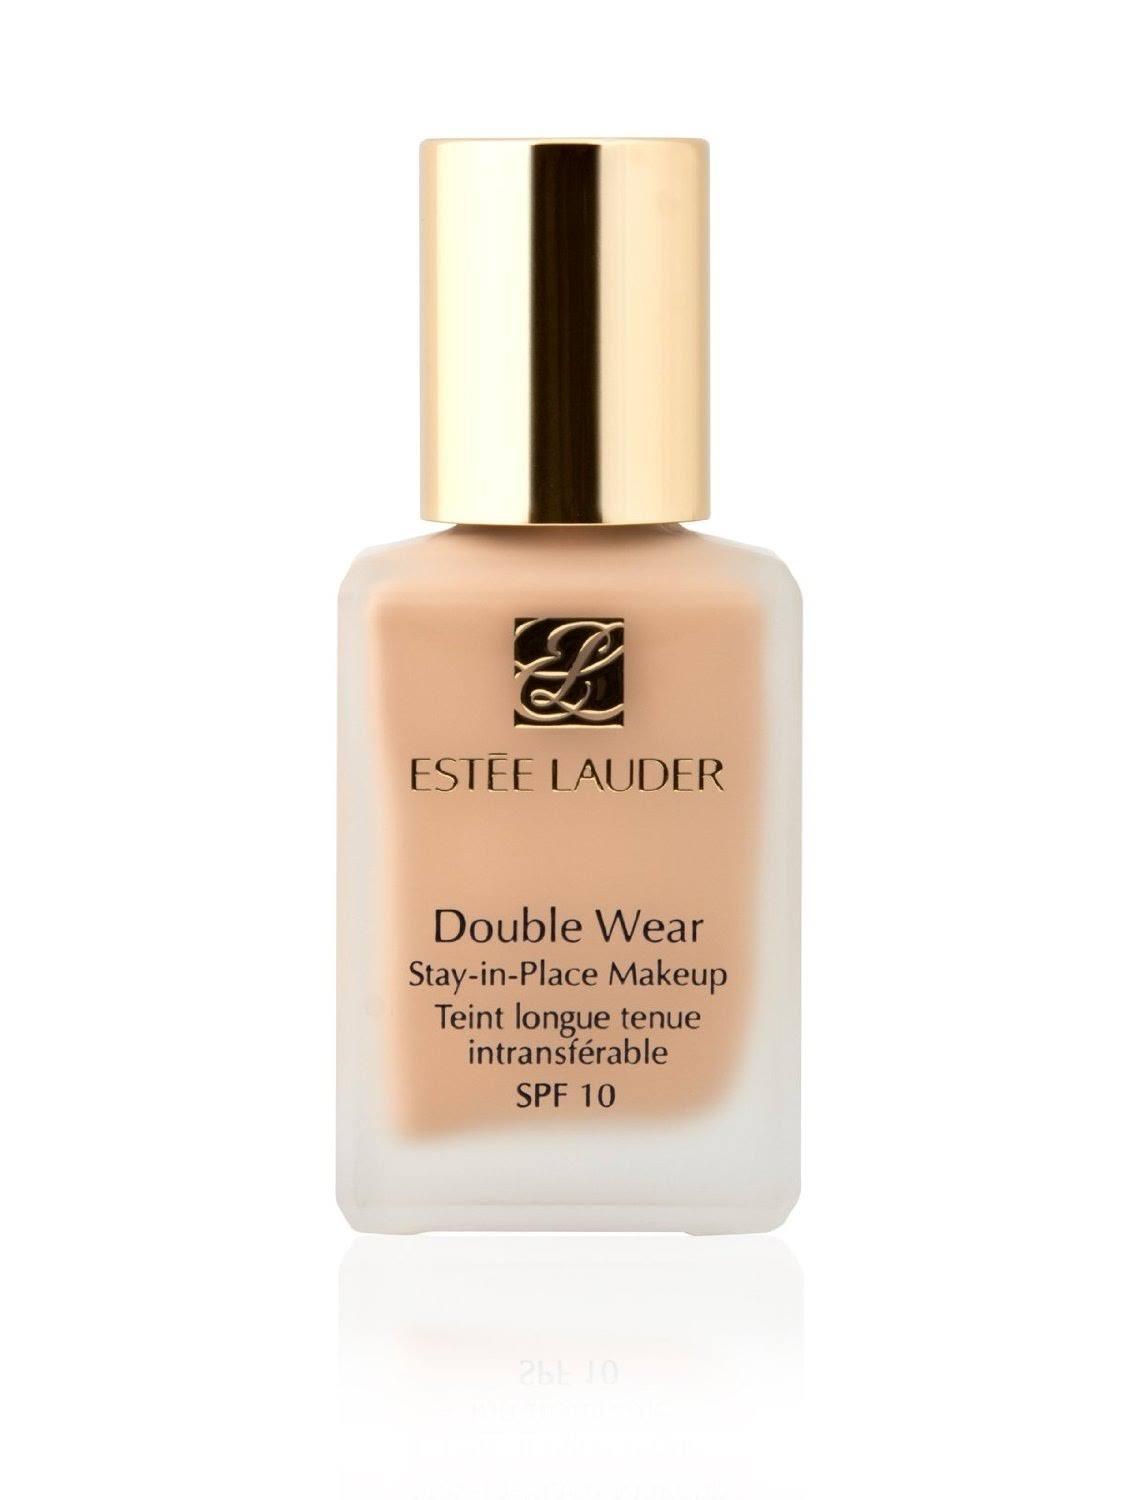 Estee Lauder Double Wear Stay-In-Place Makeup - SPF10, 04 Pebble